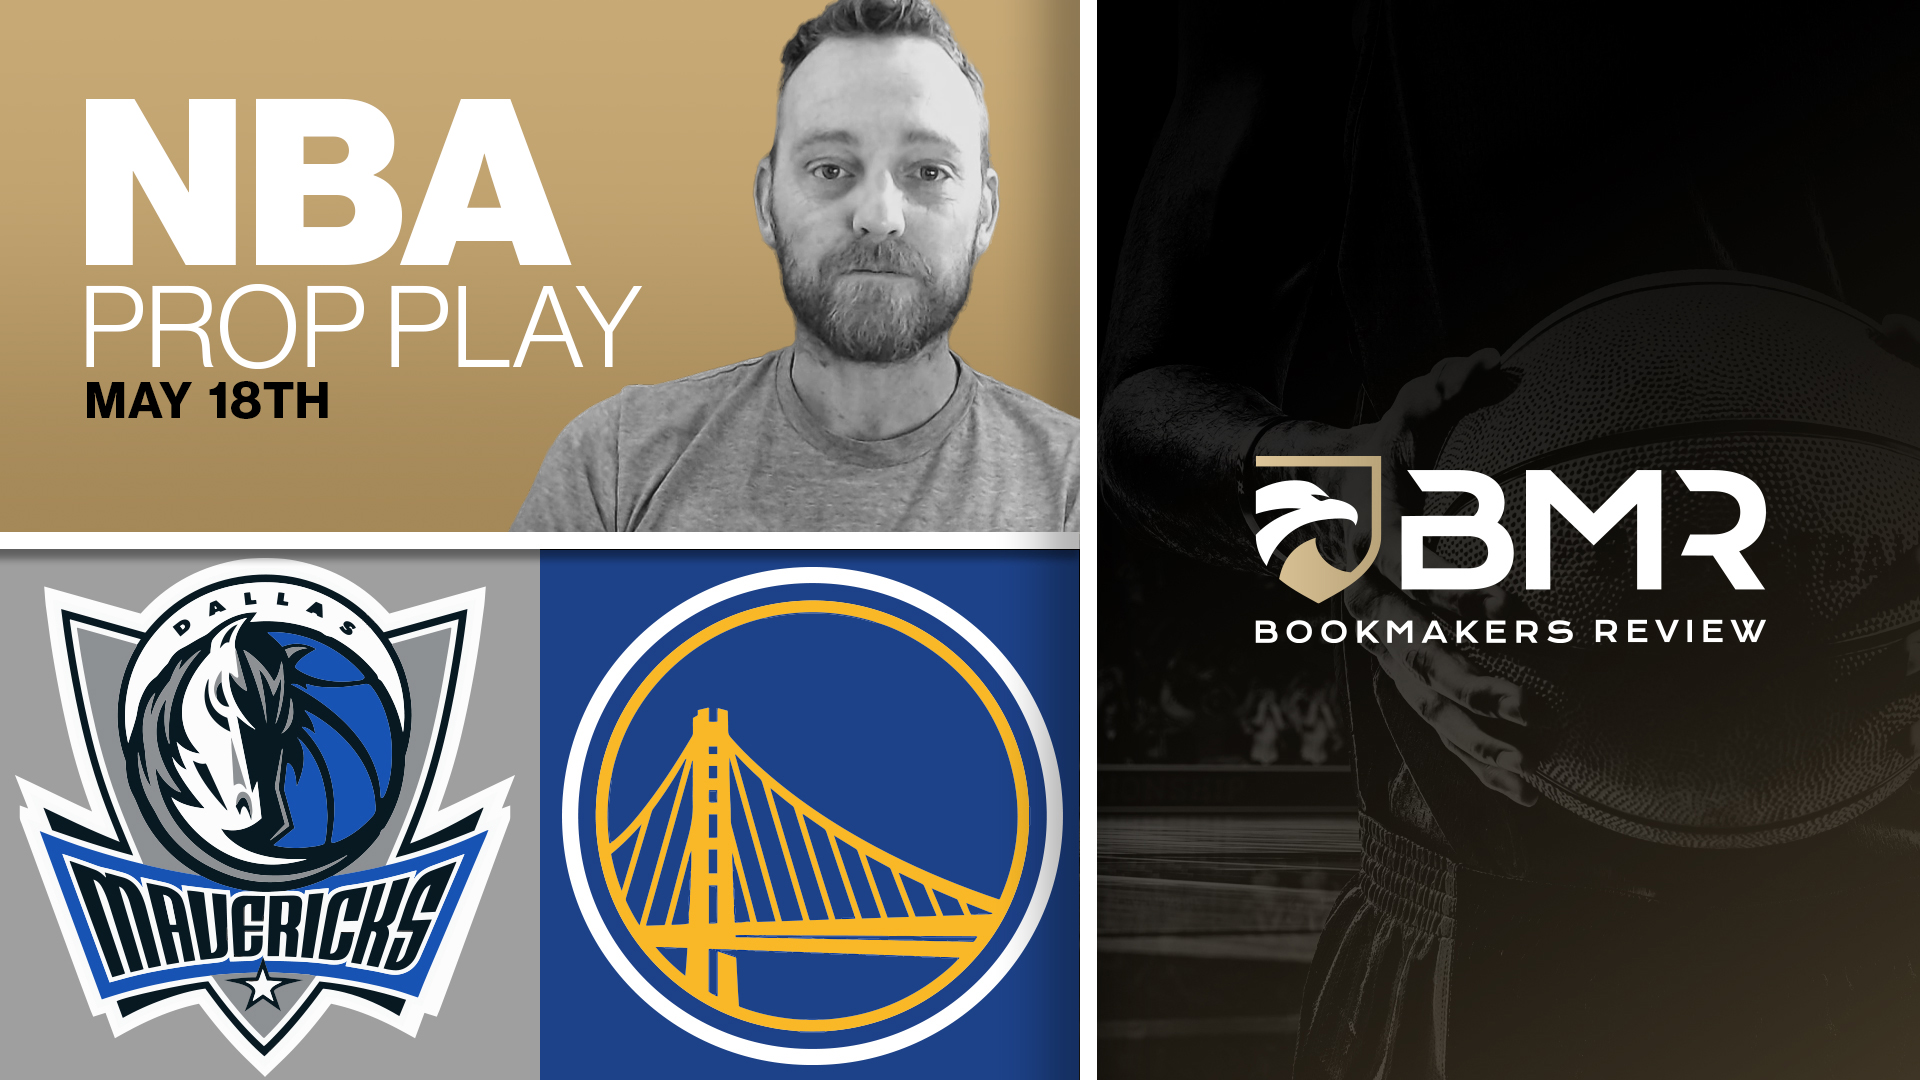 Mavericks vs. Warriors | Free NBA Playoffs Player Prop Pick by Kyle Purviance - May 18th